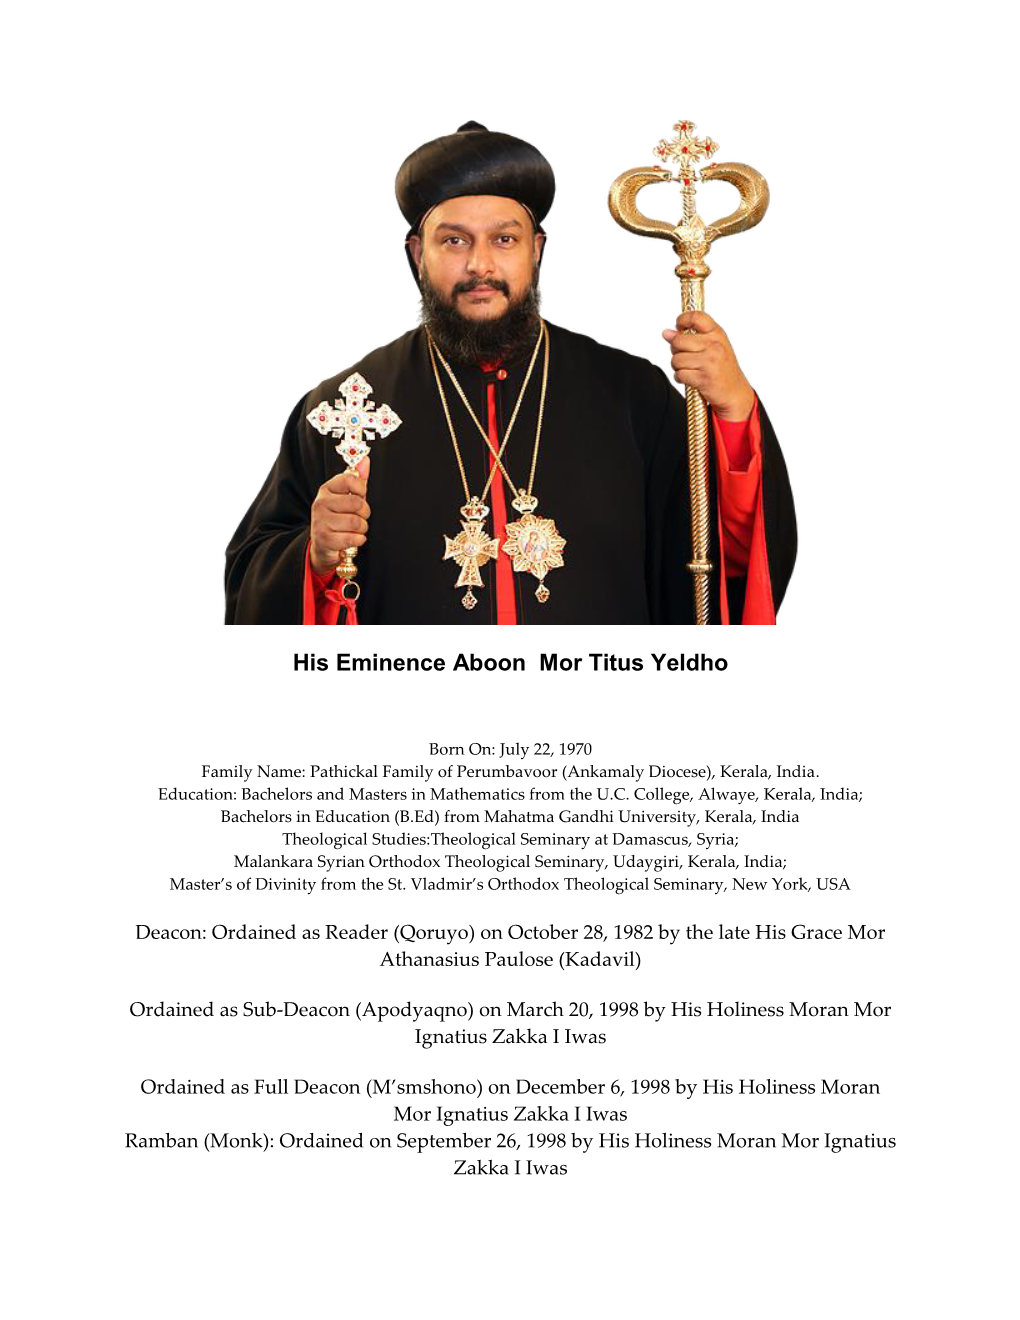 His Eminence Aboon Mor Titus Yeldho